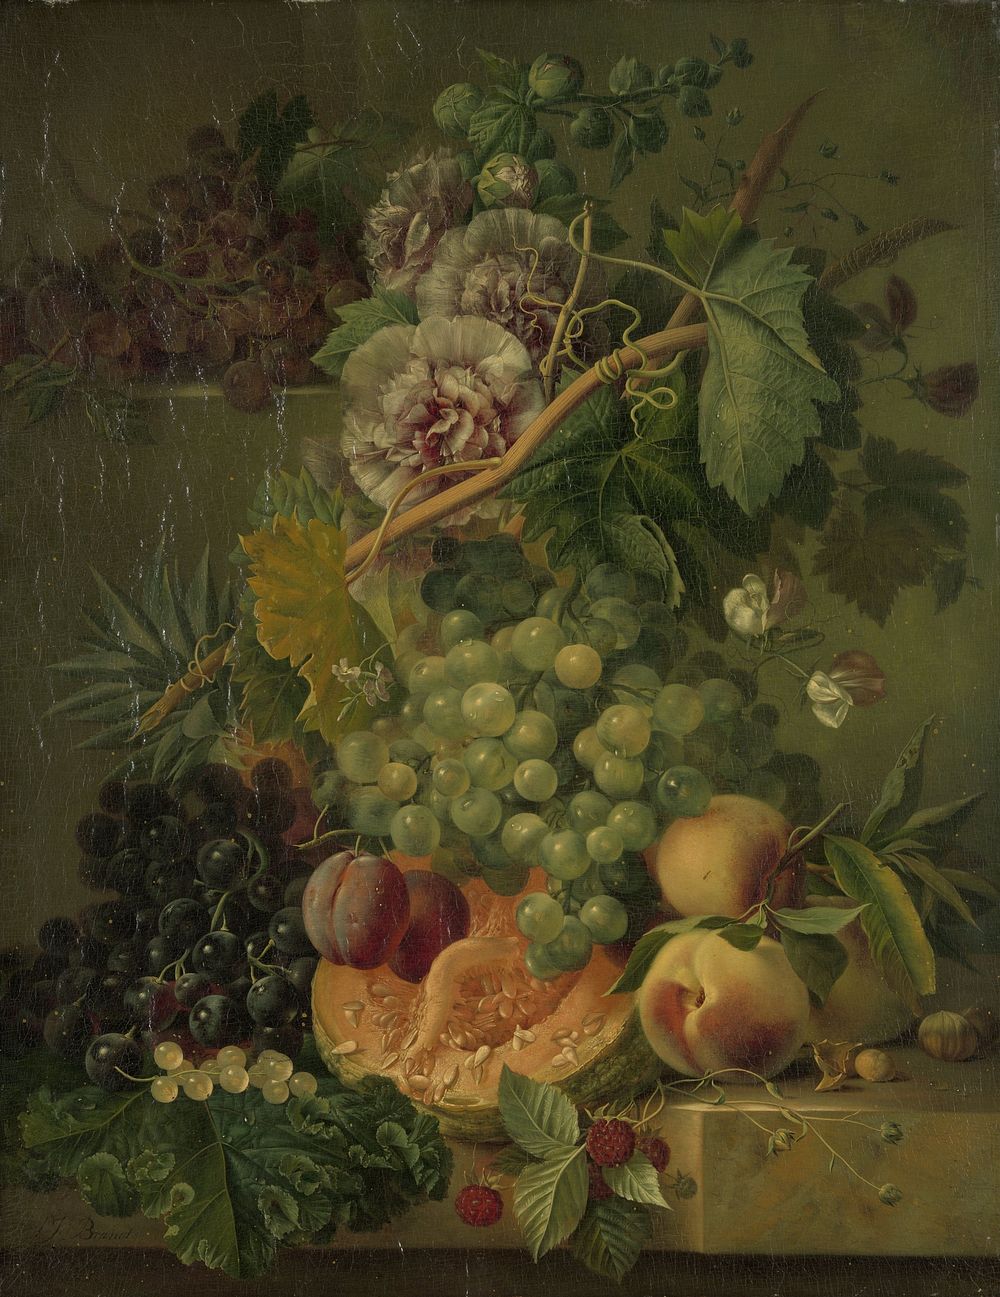 Still Life with Flowers and Fruits (1816 - 1817) by Albertus Jonas Brandt